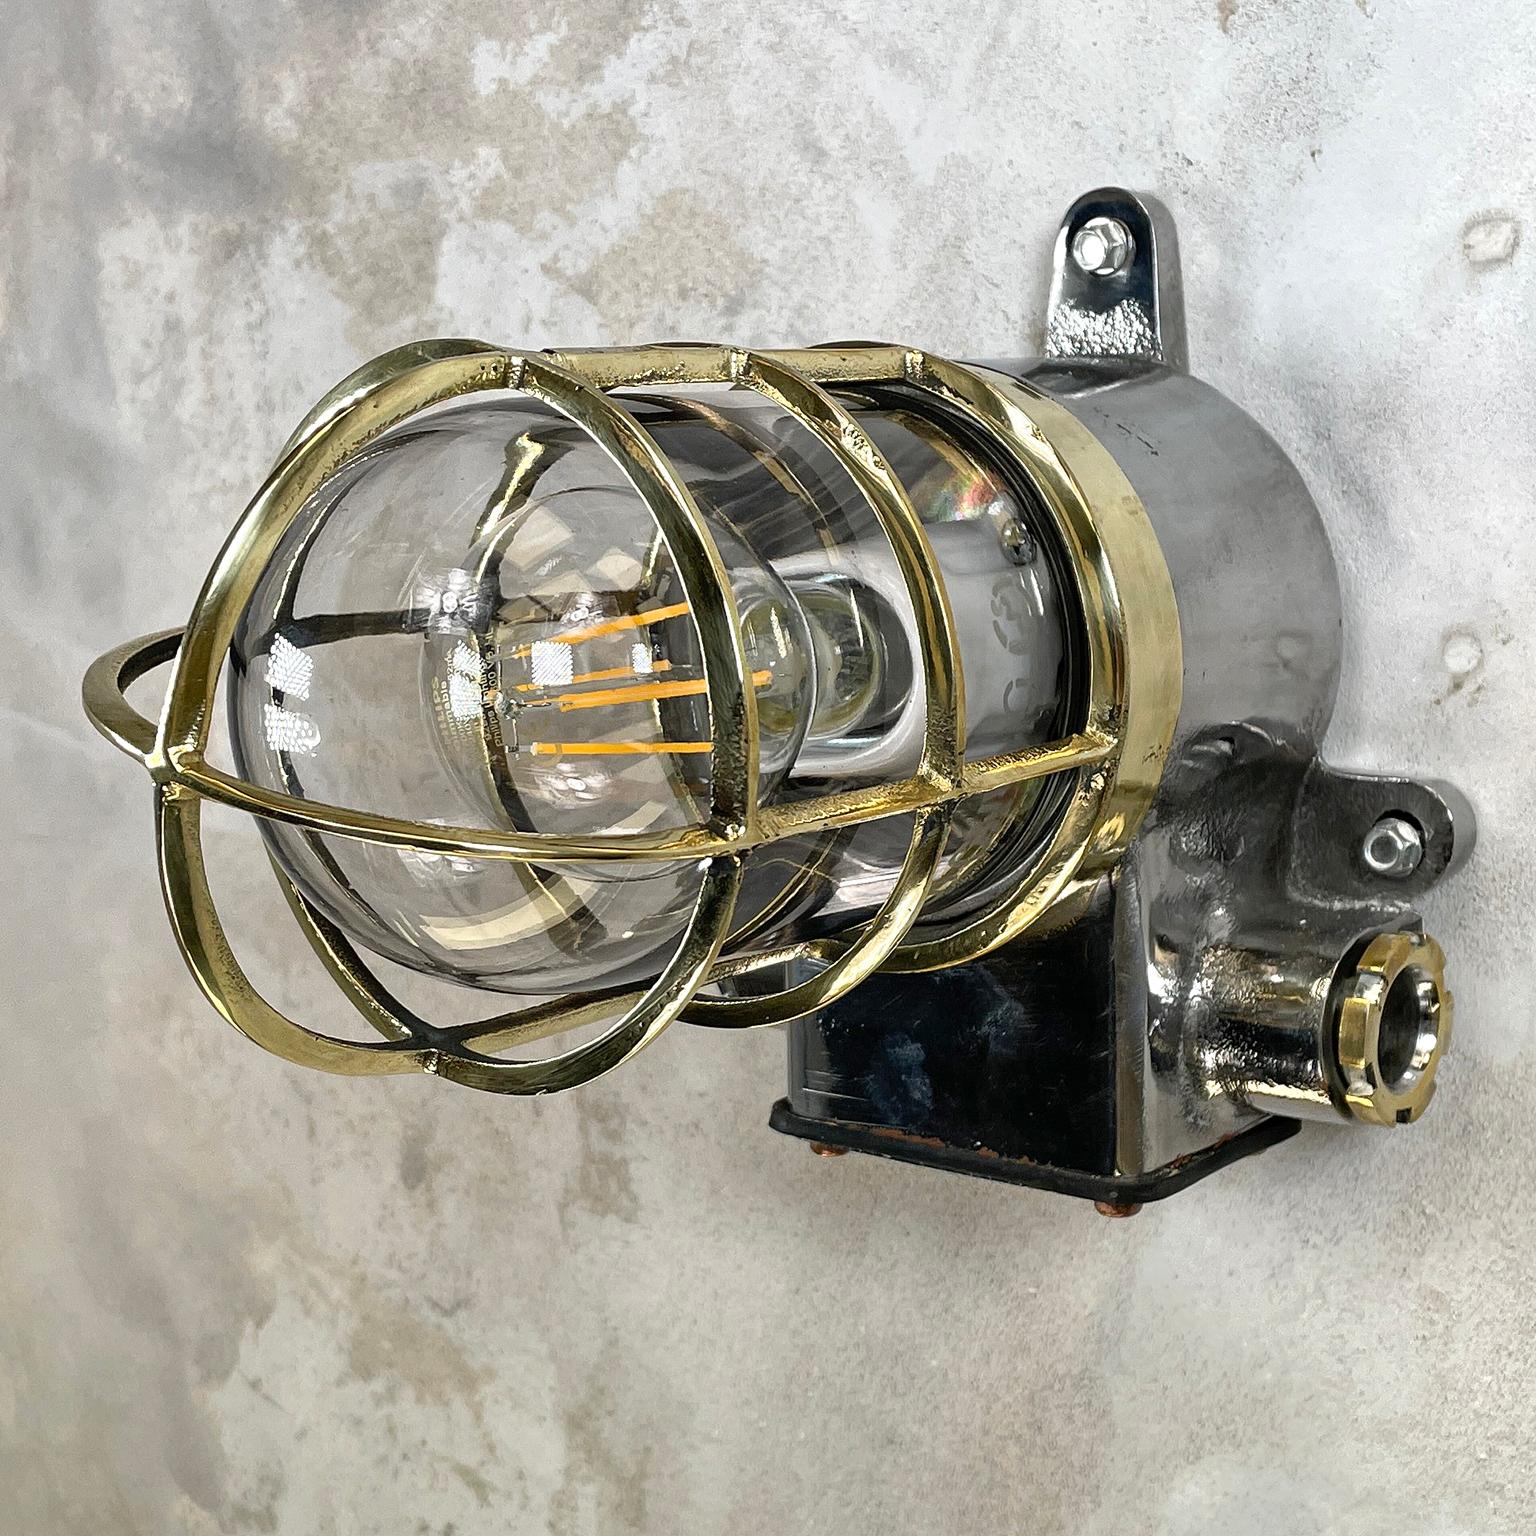 A vintage Industrial 1980s Japanese cast iron wall sconce with a brass cage and glass shade manufactured by Kokosha. 
Reclaimed and professionally restored by hand in UK ready for contemporary interiors. 
Perfect wall lighting to add some rustic